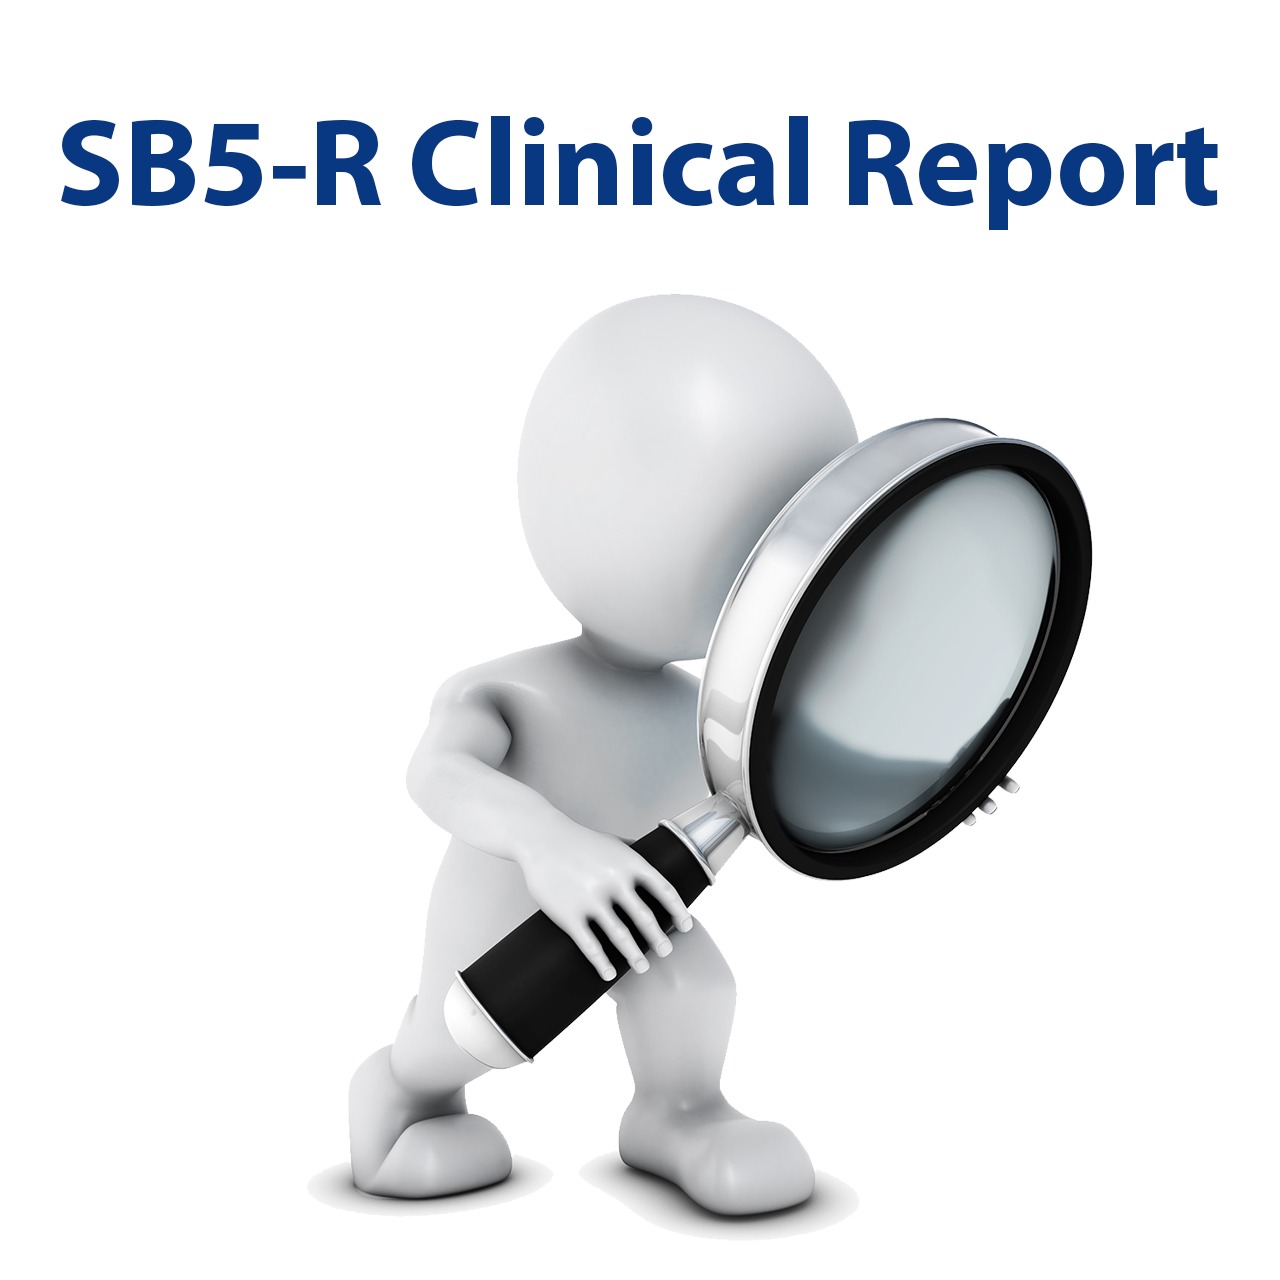 scoring-program-stanford-binet-intelligence-scale-arab-norms-clinical-report 